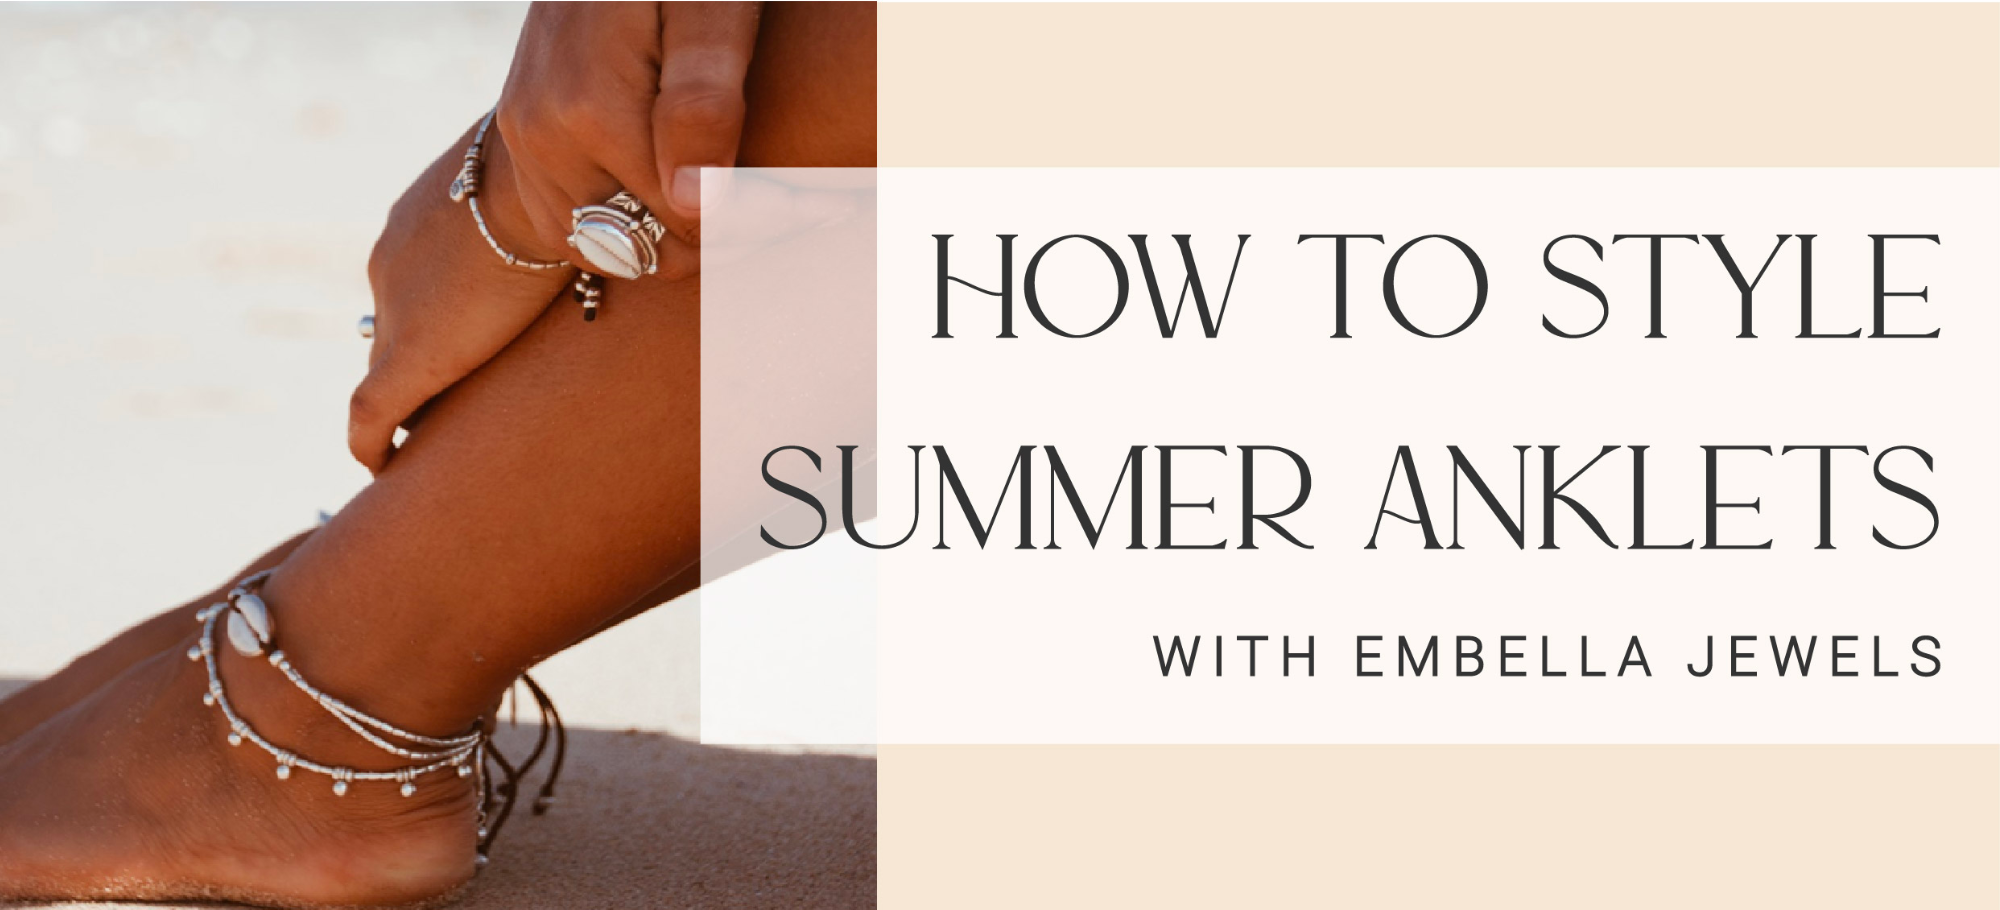 how to style summer anklets or ankle bracelets with embella jewels